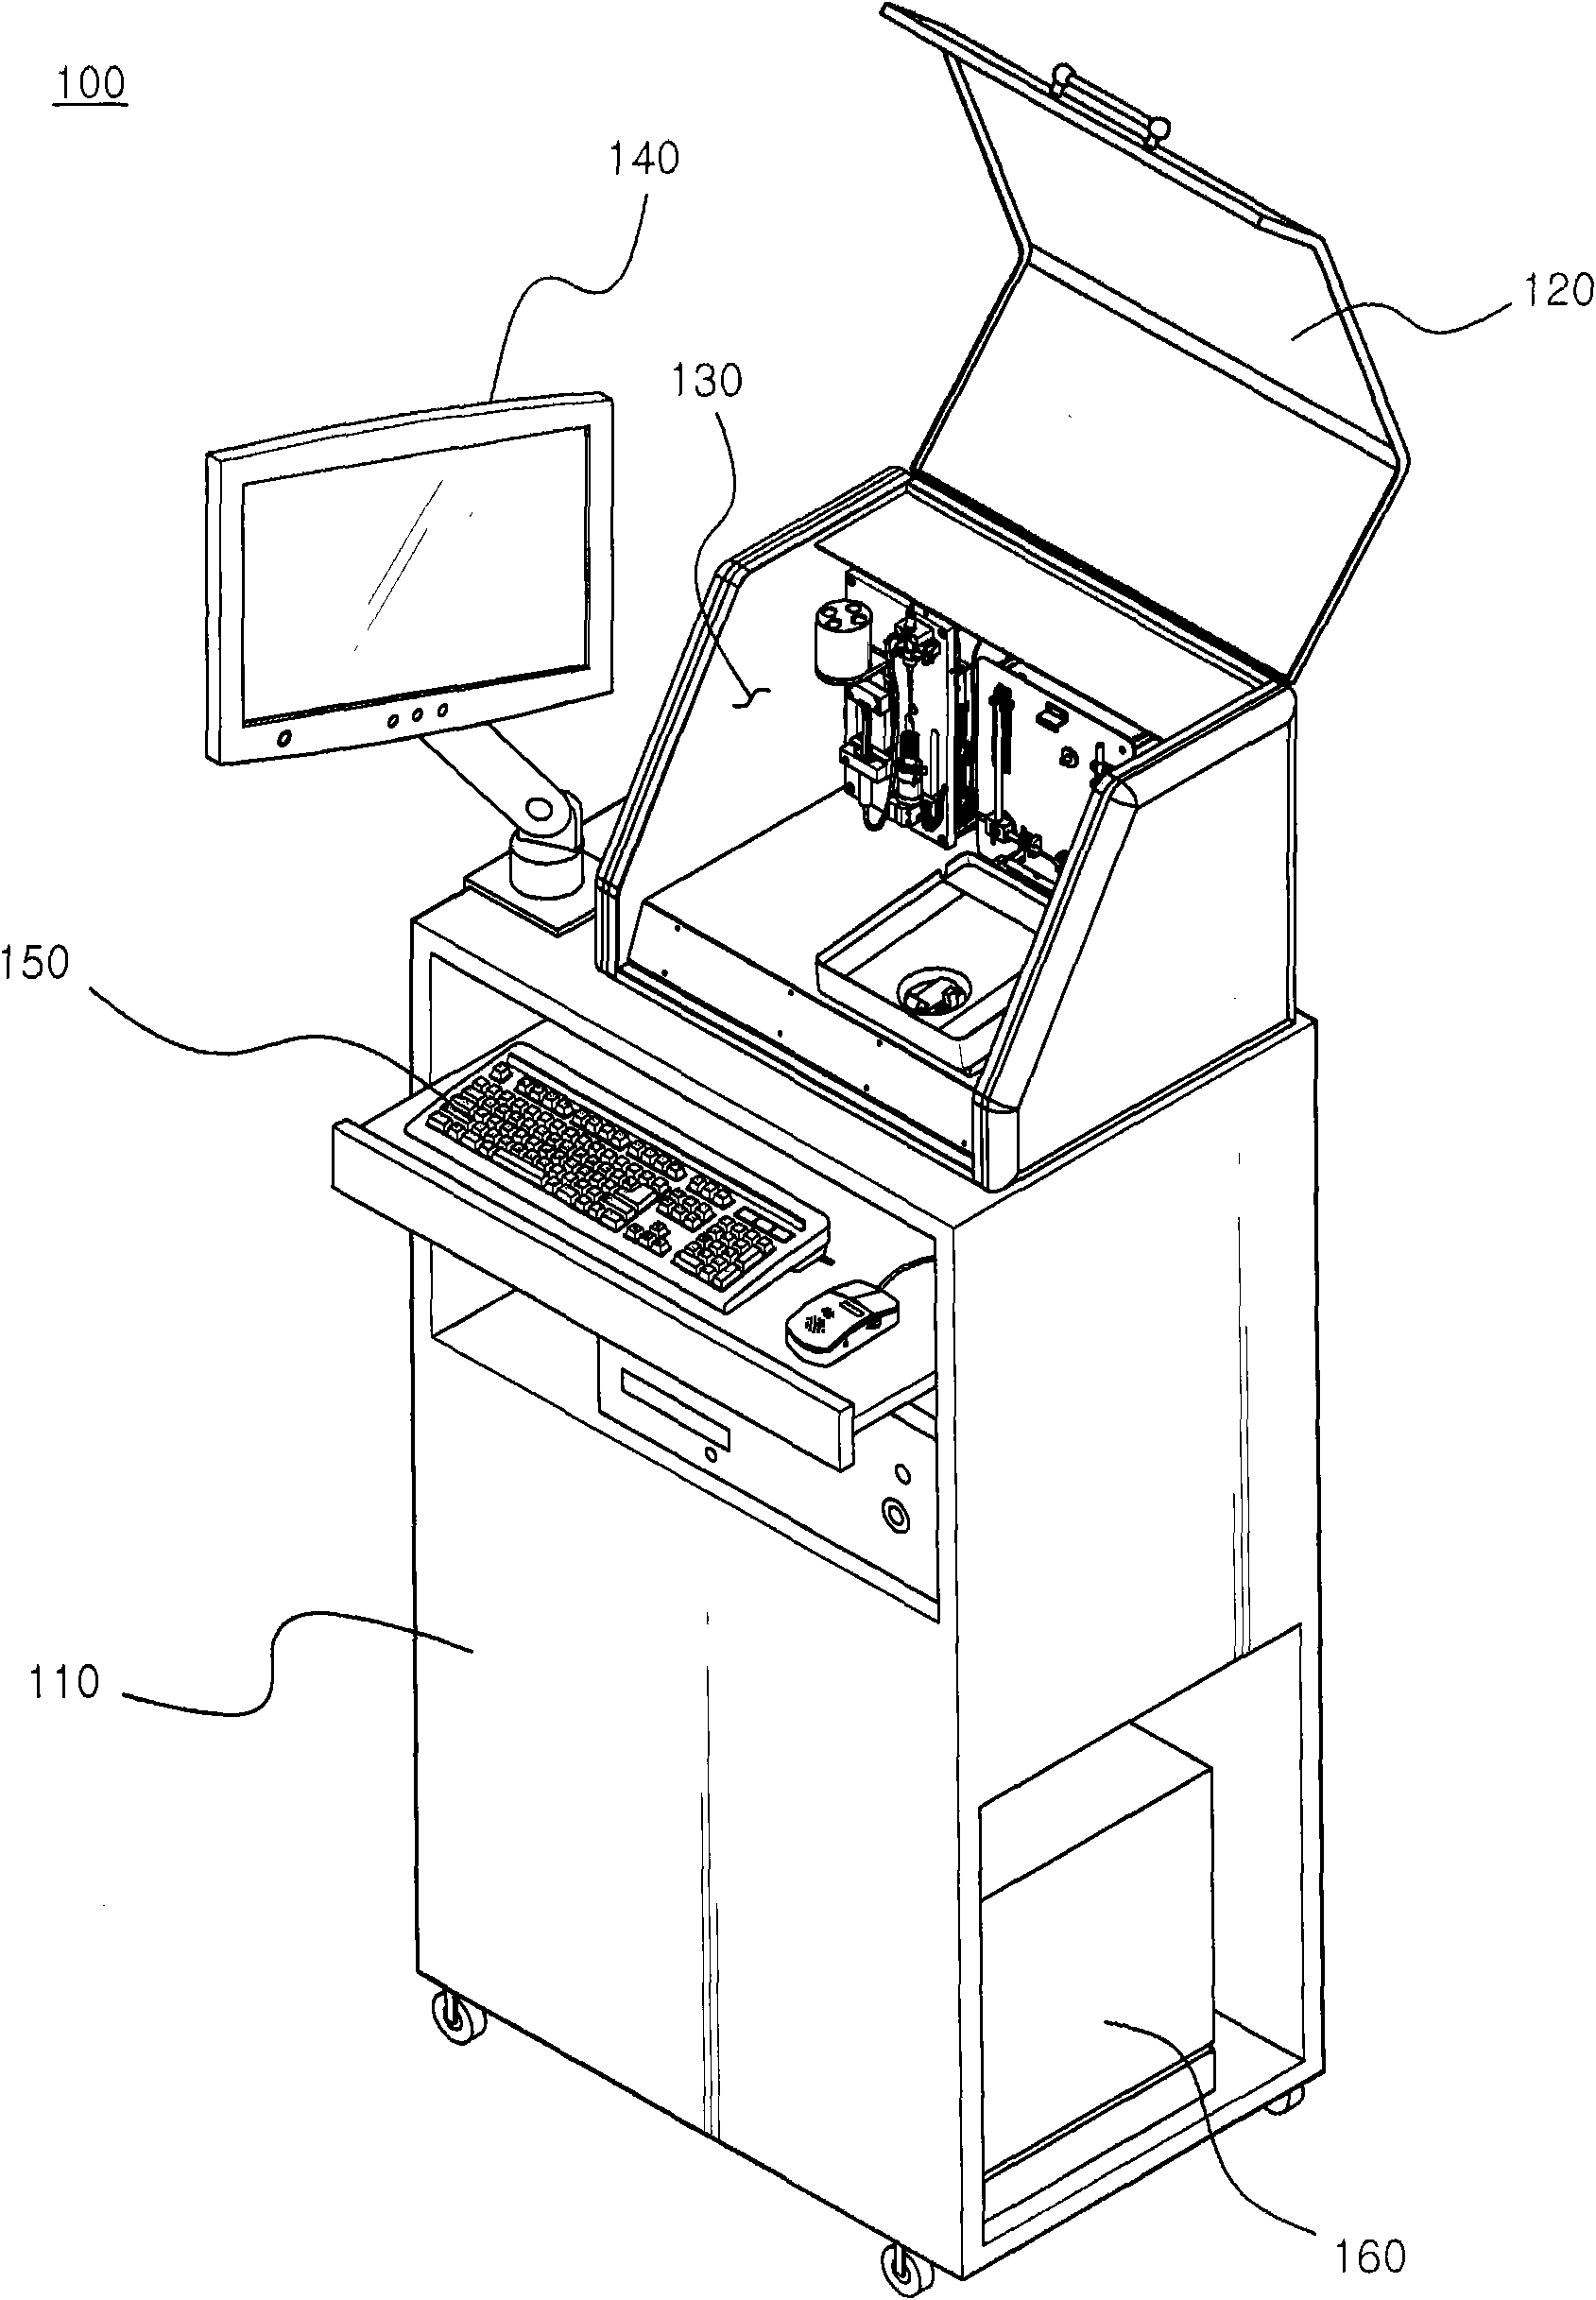 Device for automatically measuring viscosity of liquid